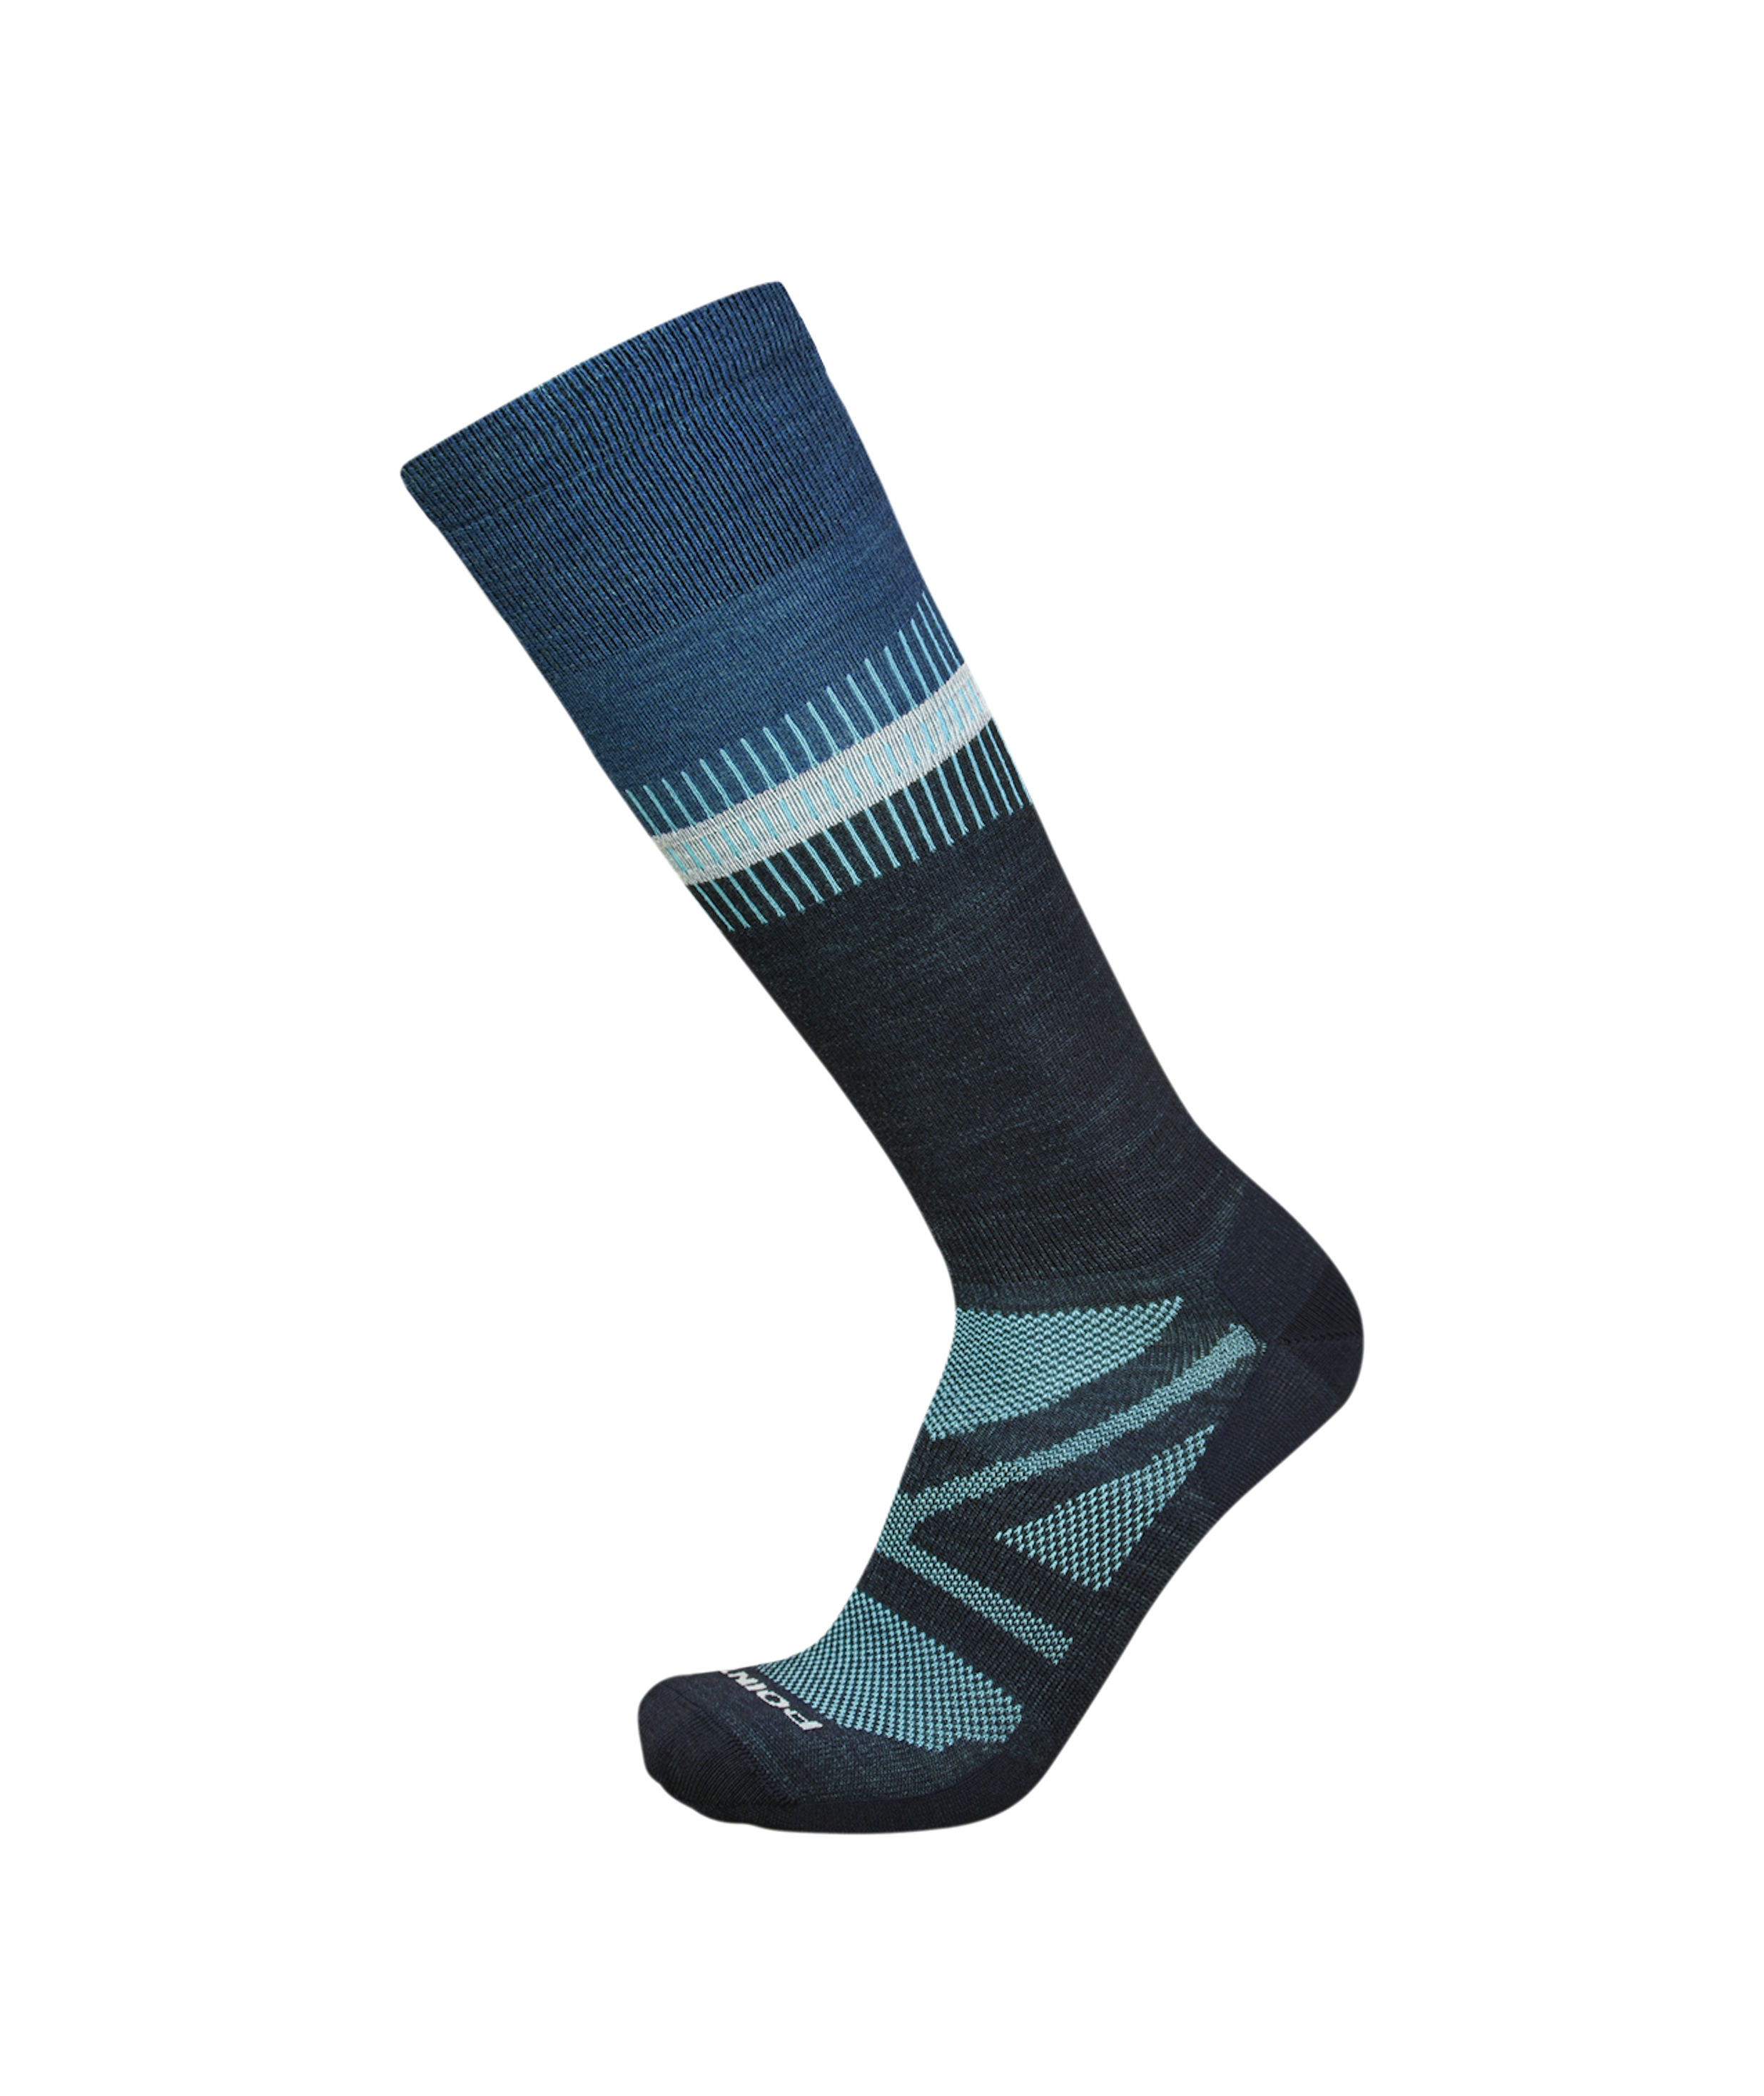 Point6 Reflection Ultra Light OTC Ski Sock in various shades of blue with geometric designs.